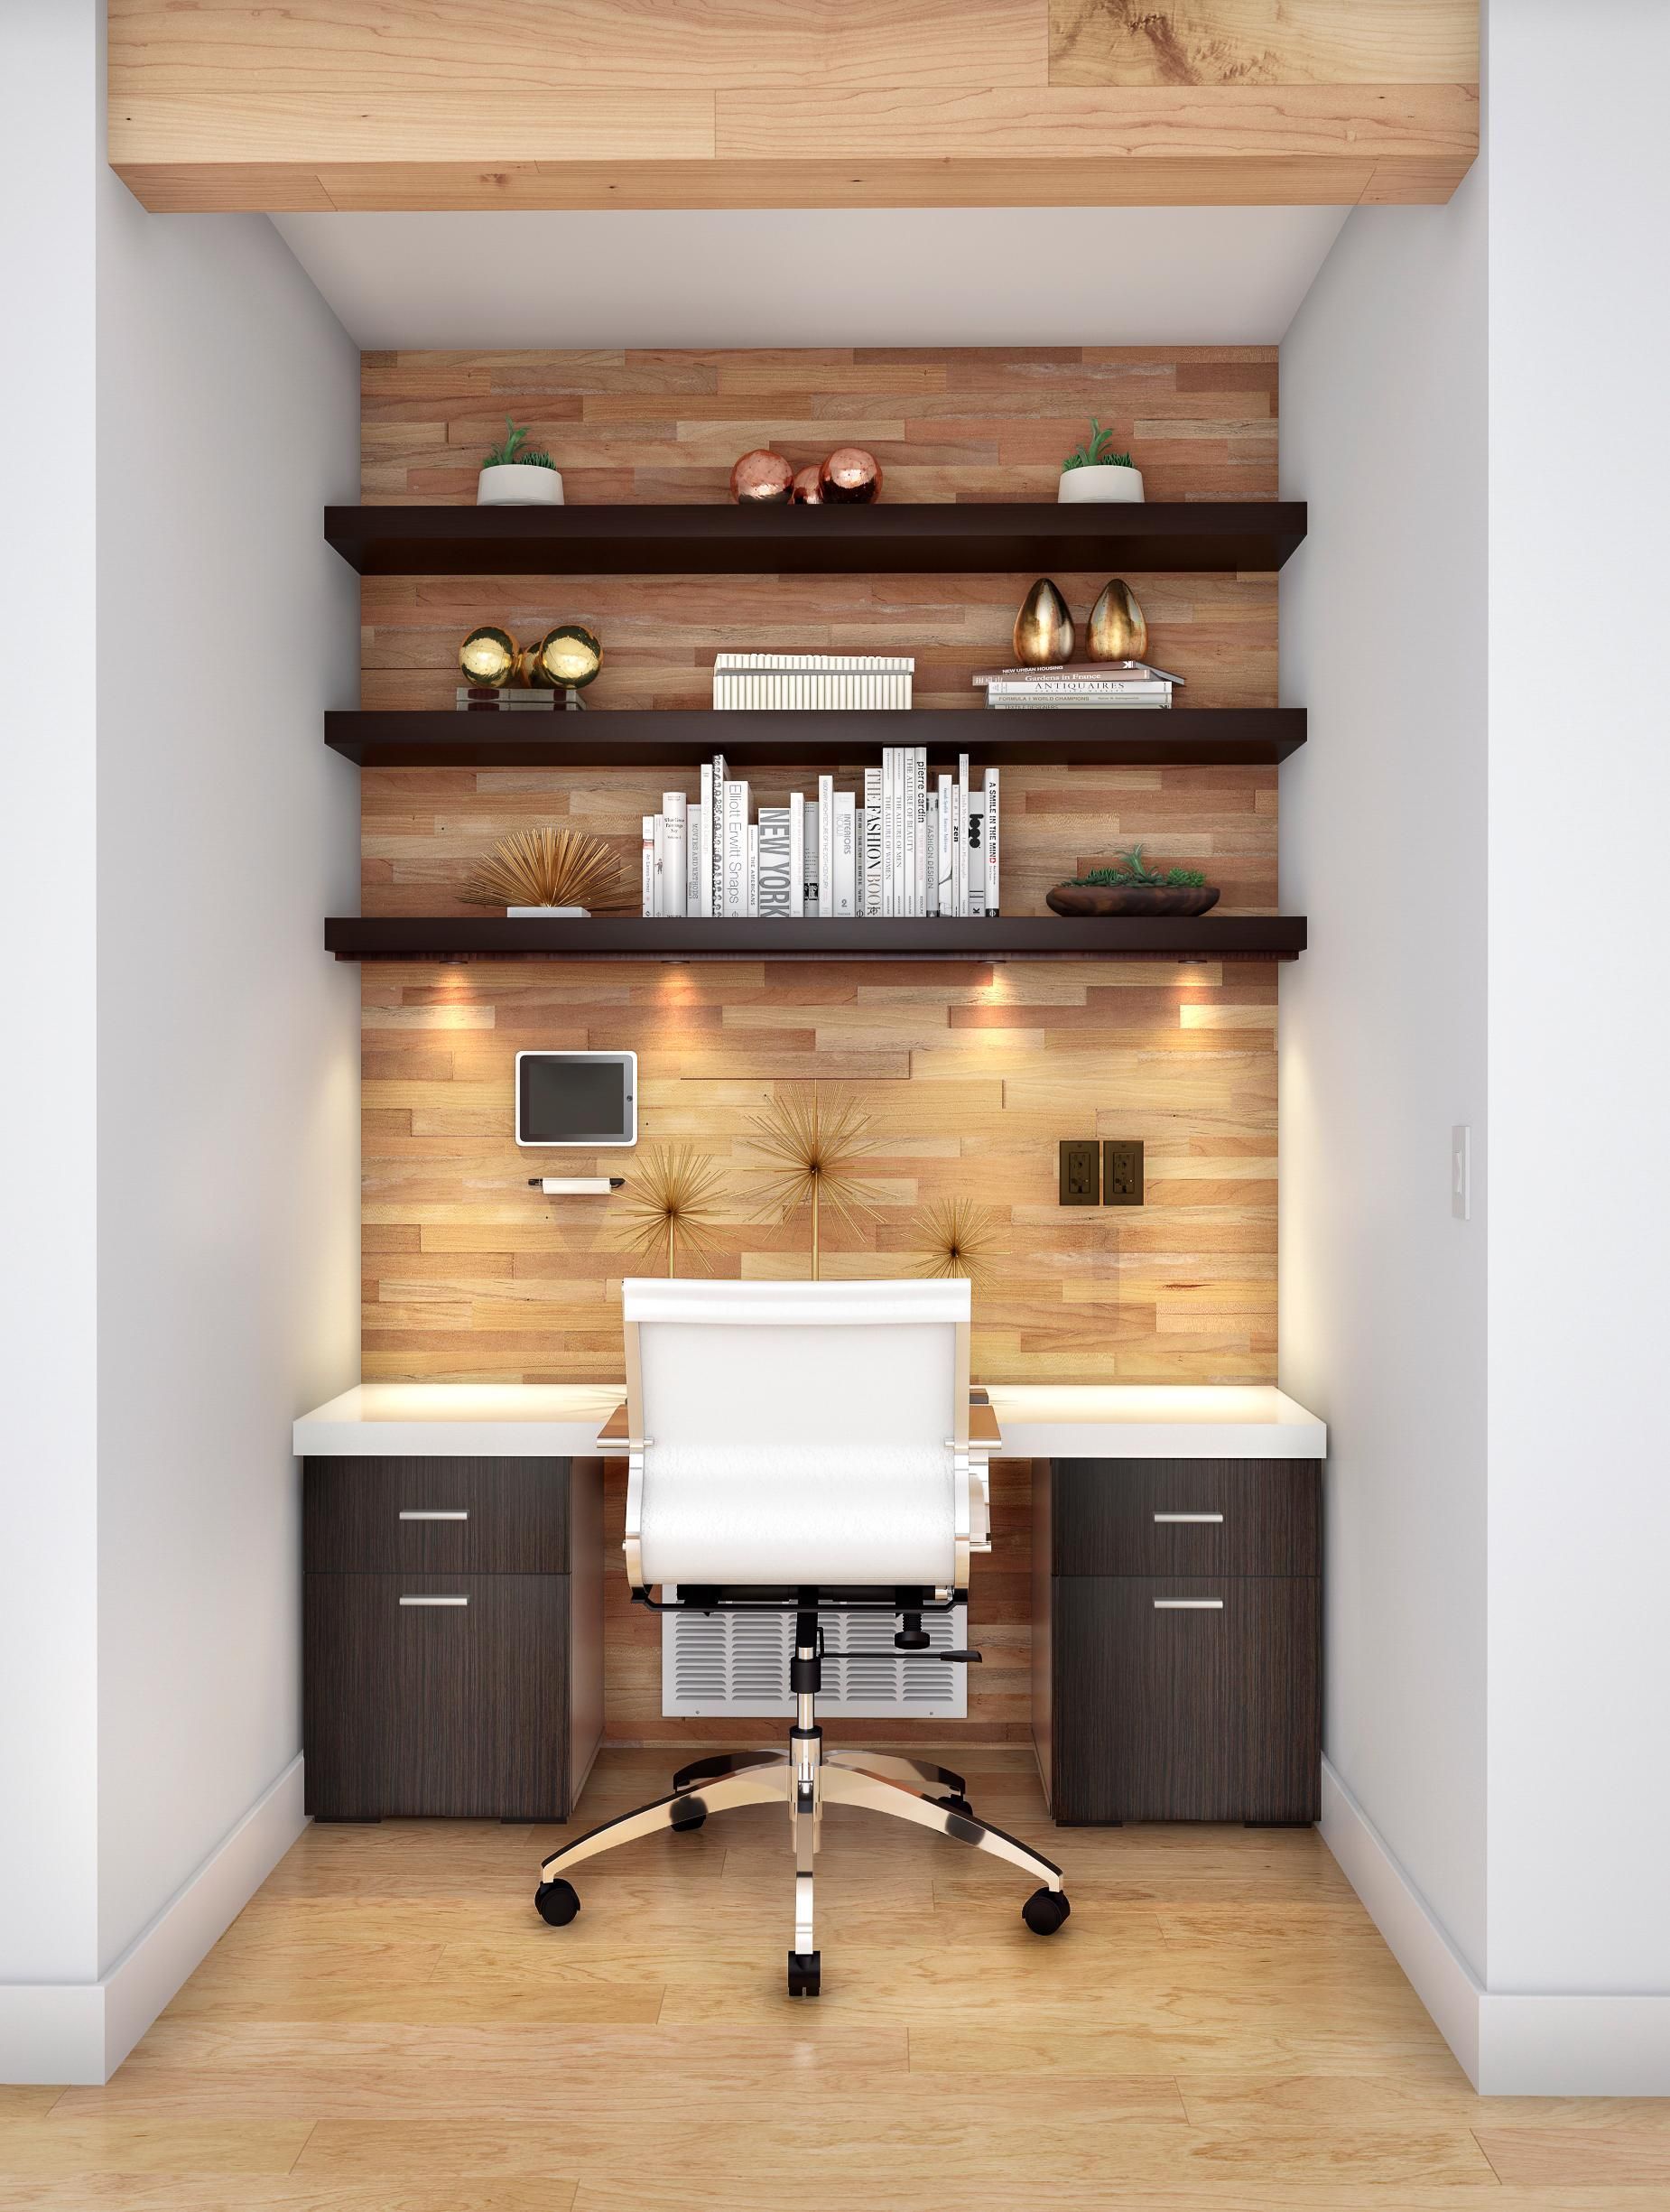 Modern Home Office in Warm Wood -   24 office fitness challenge
 ideas